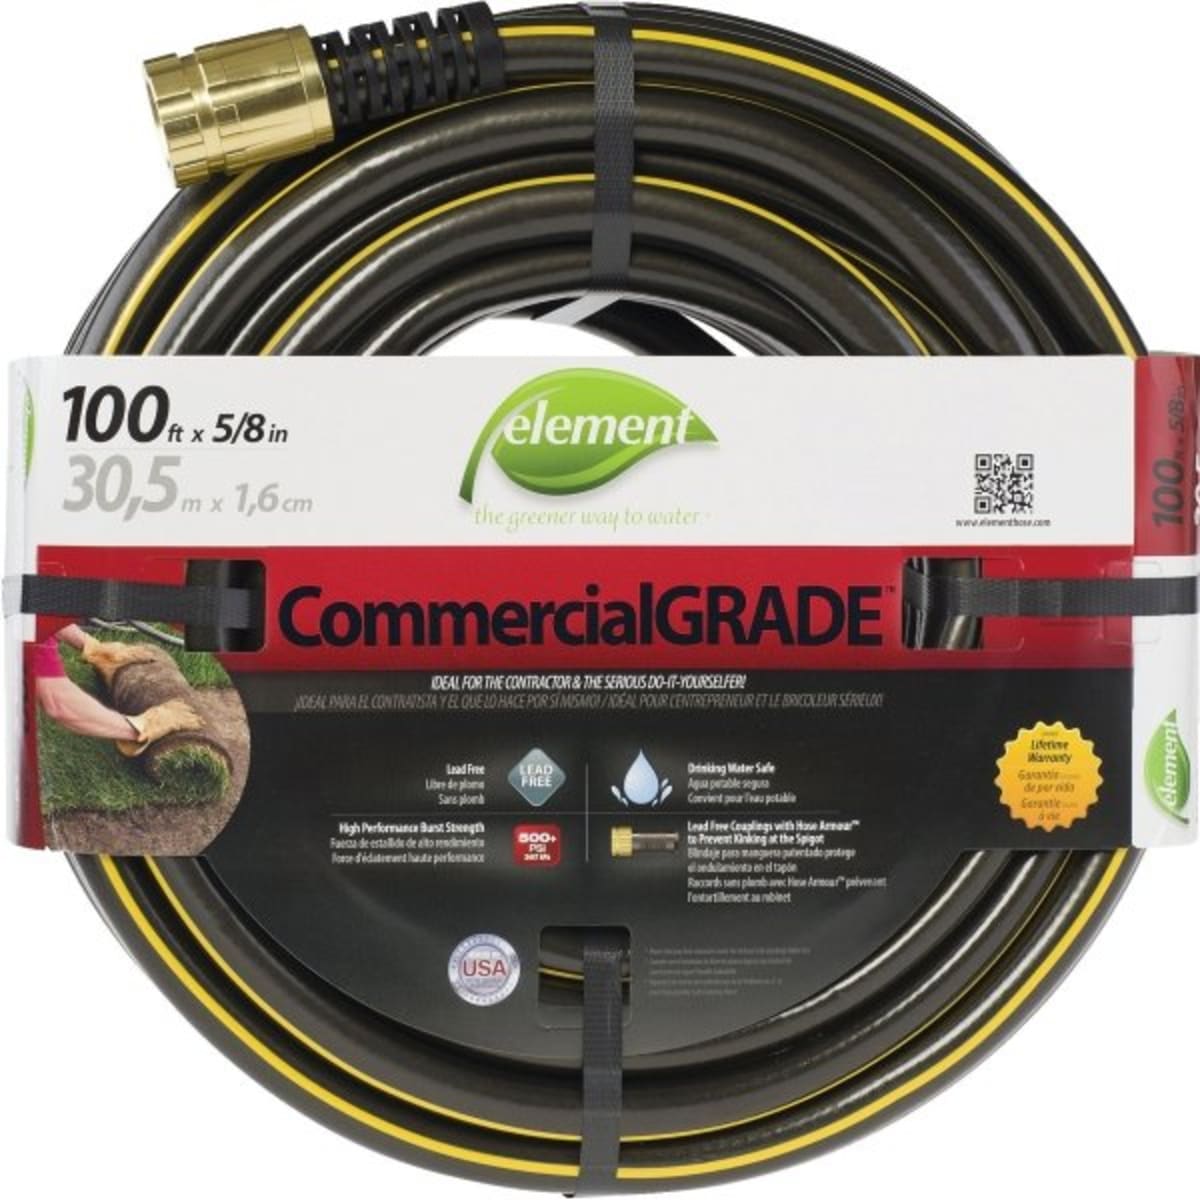 ThermaFLEX Heavy Duty Hose for Cold Weather